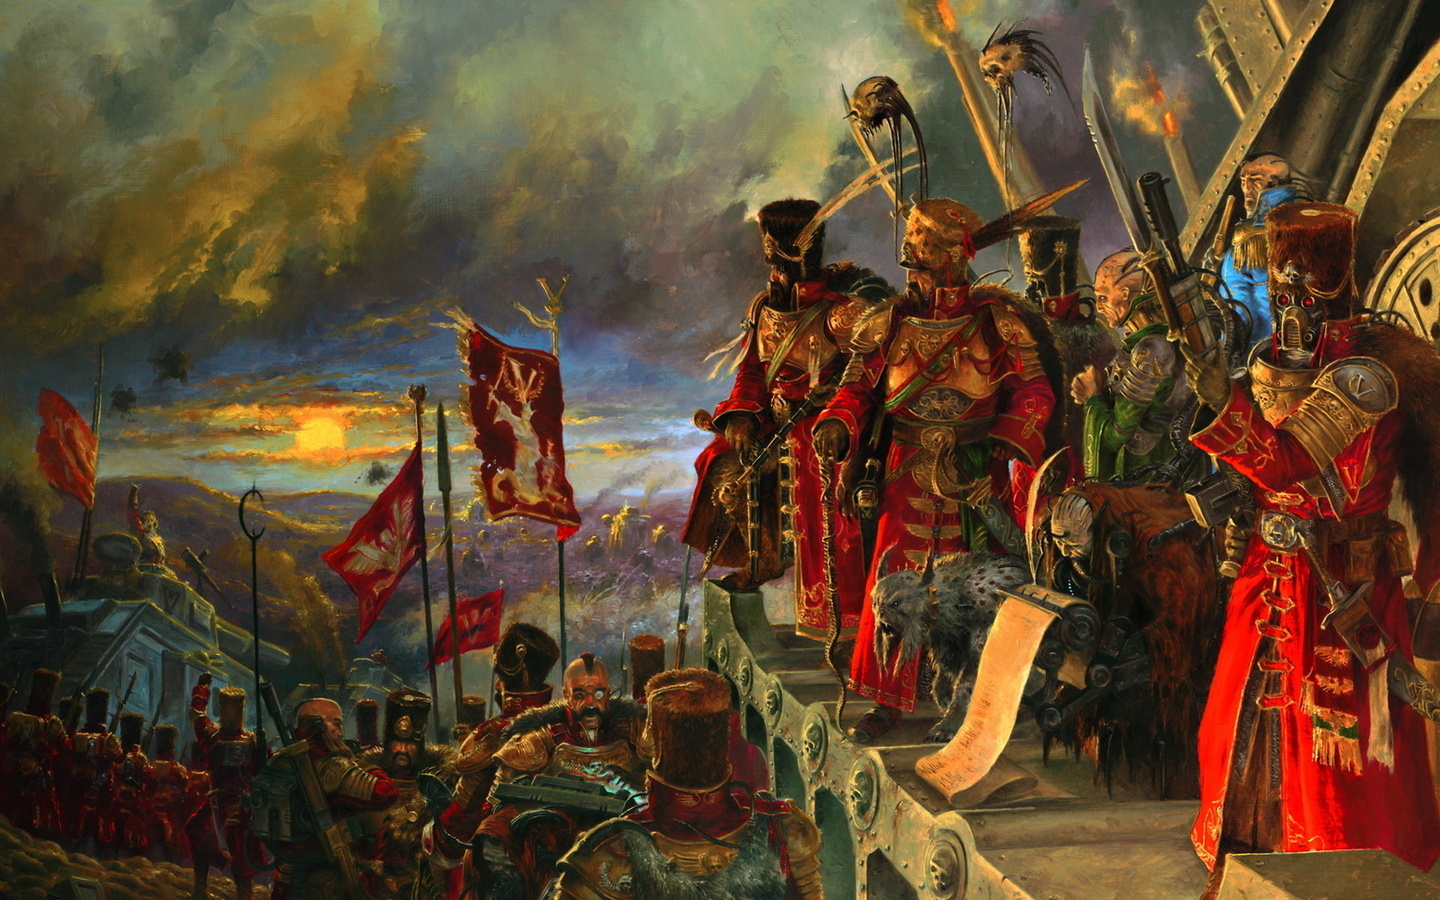 1440x900 banners, warhammer 40k, the sky, fighters, generals